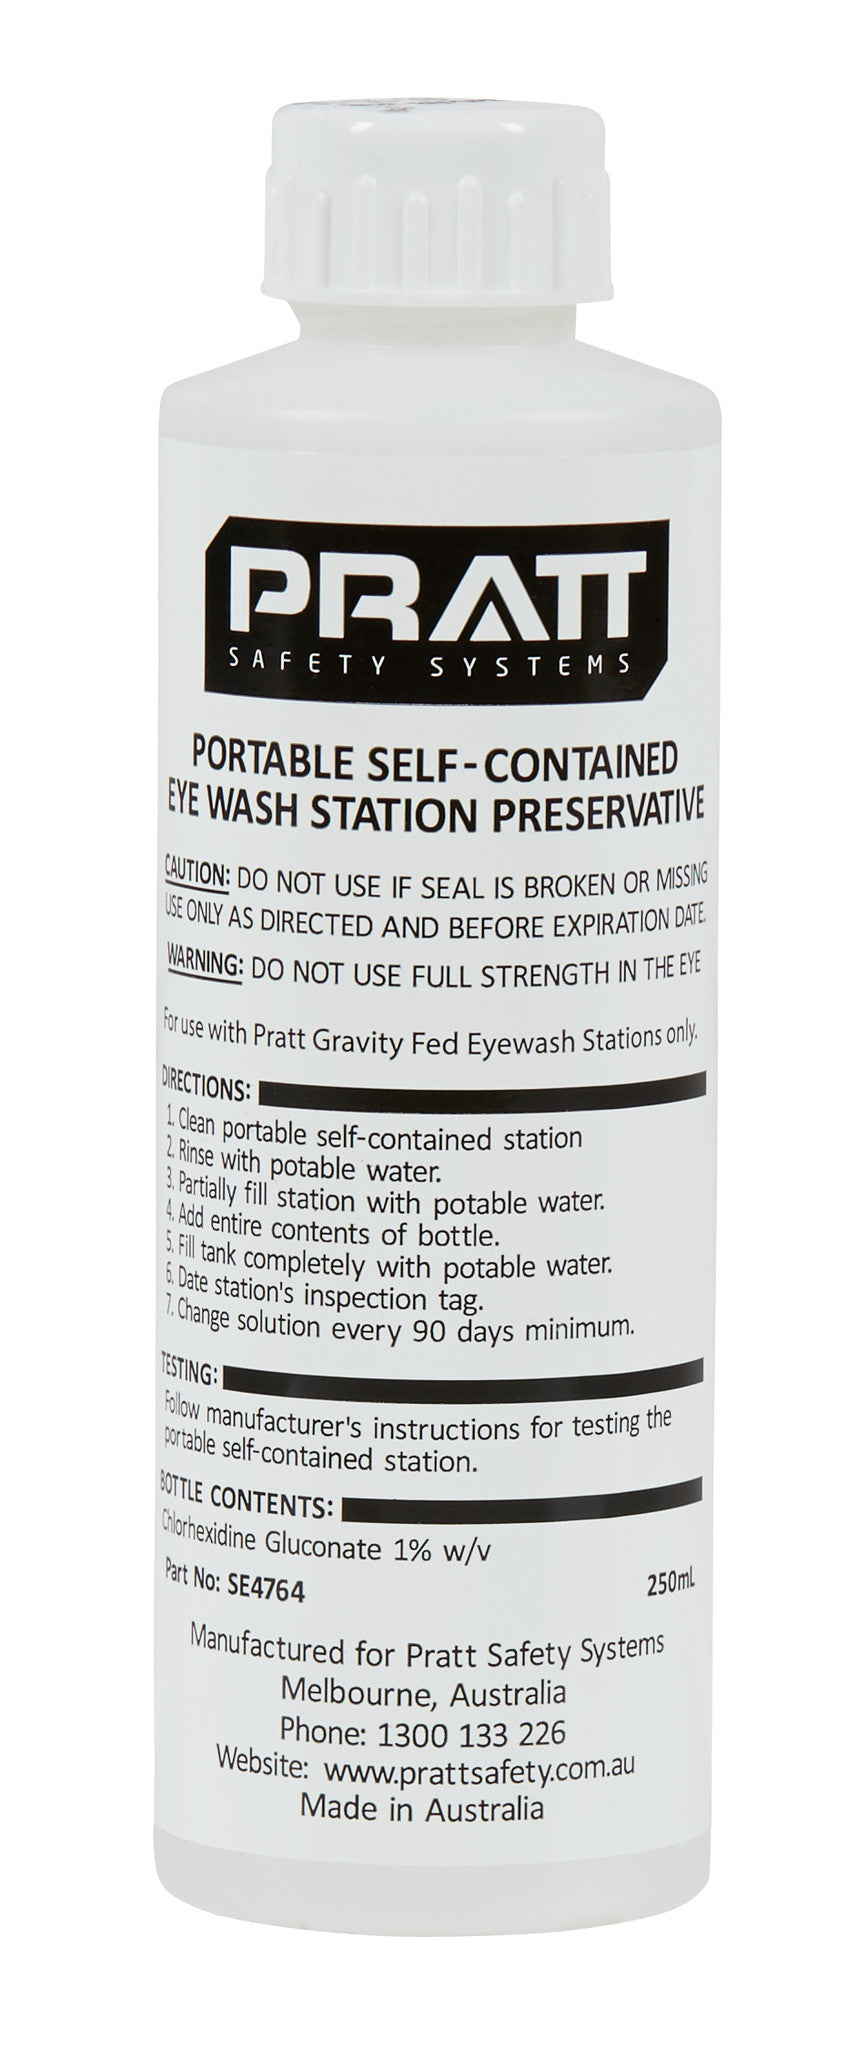 Water preservative for Portable emergency eyewash and body wash units, Portable Eye & Body Wash - DG Safety